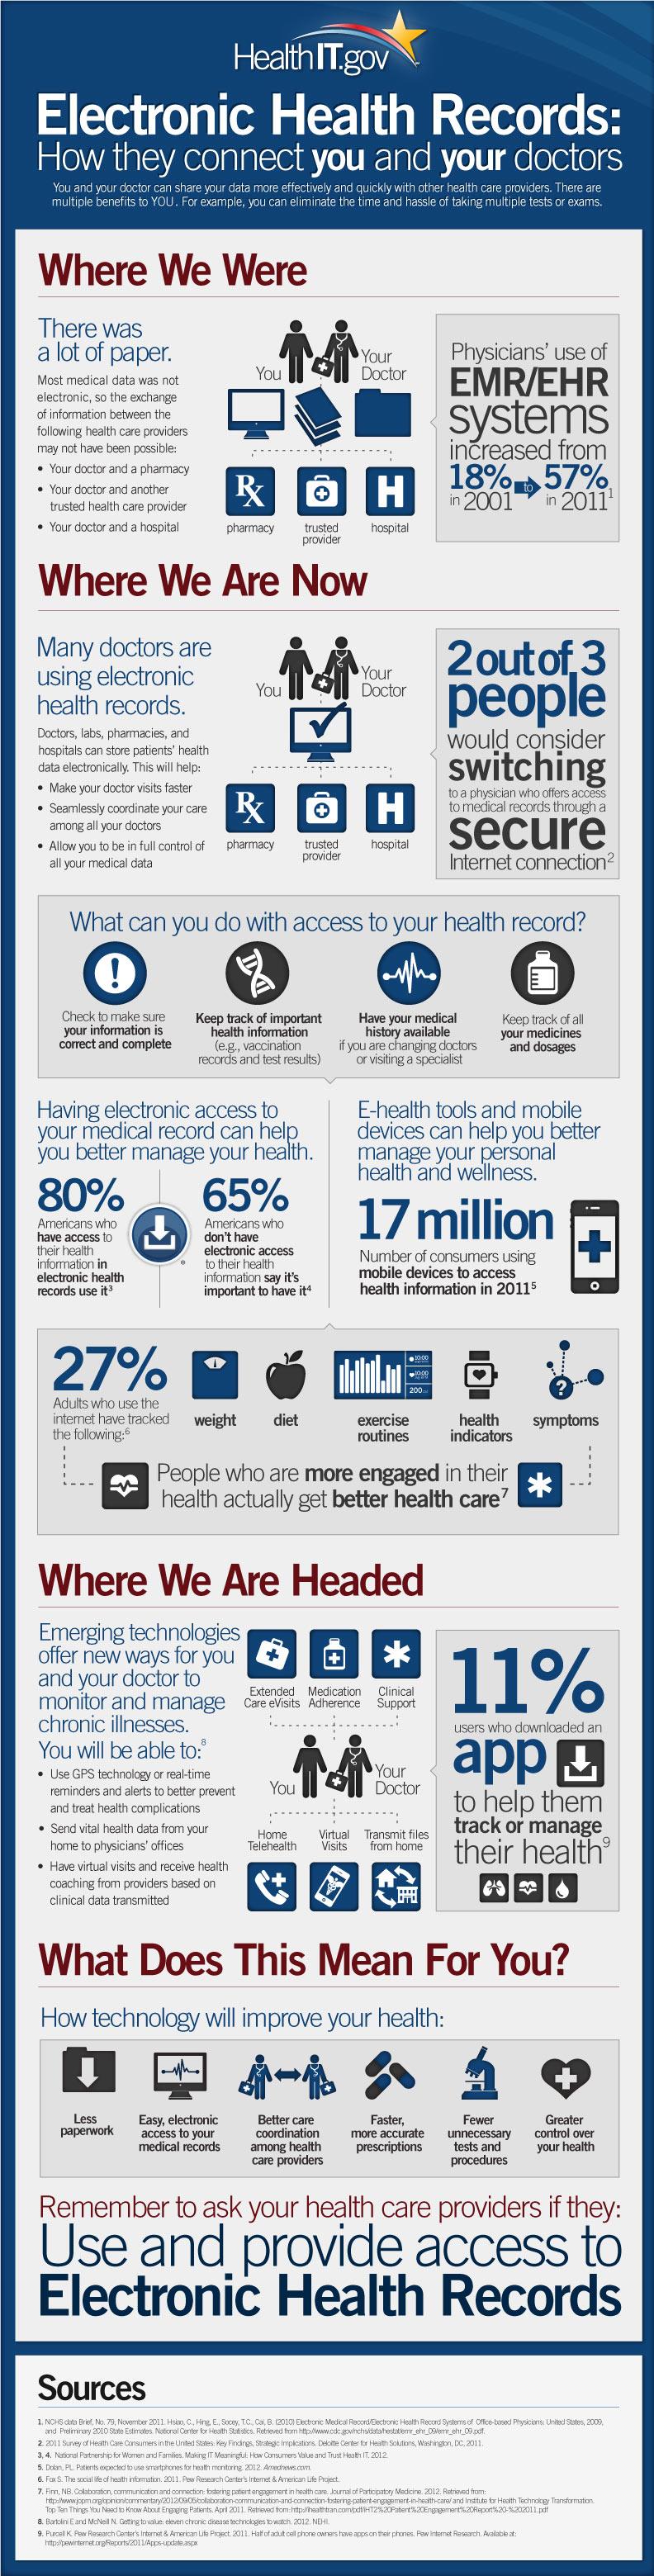 Electronic Health Records Infographic Image